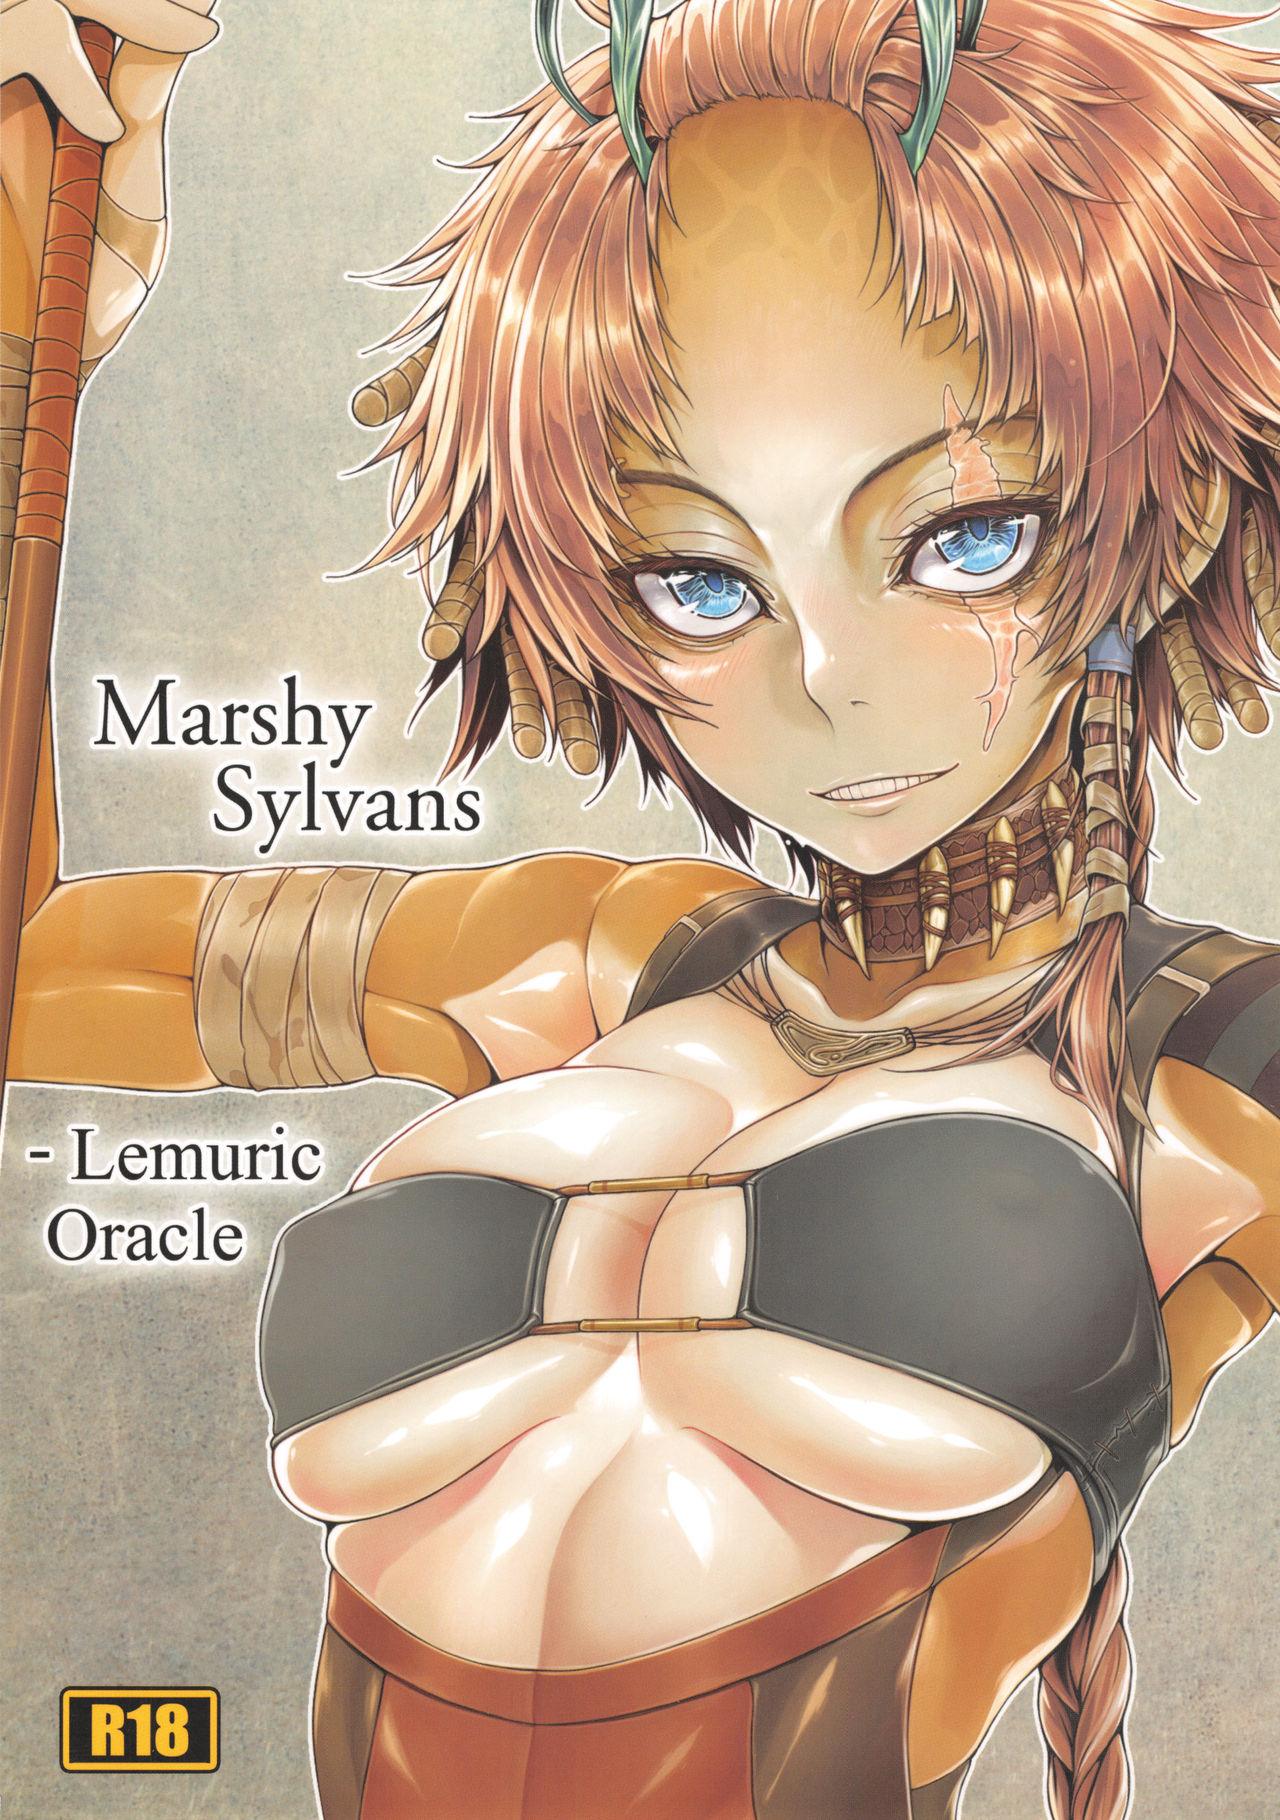 Mexicana Marshy Sylvans - Lemuric Oracle Mofos - Picture 1